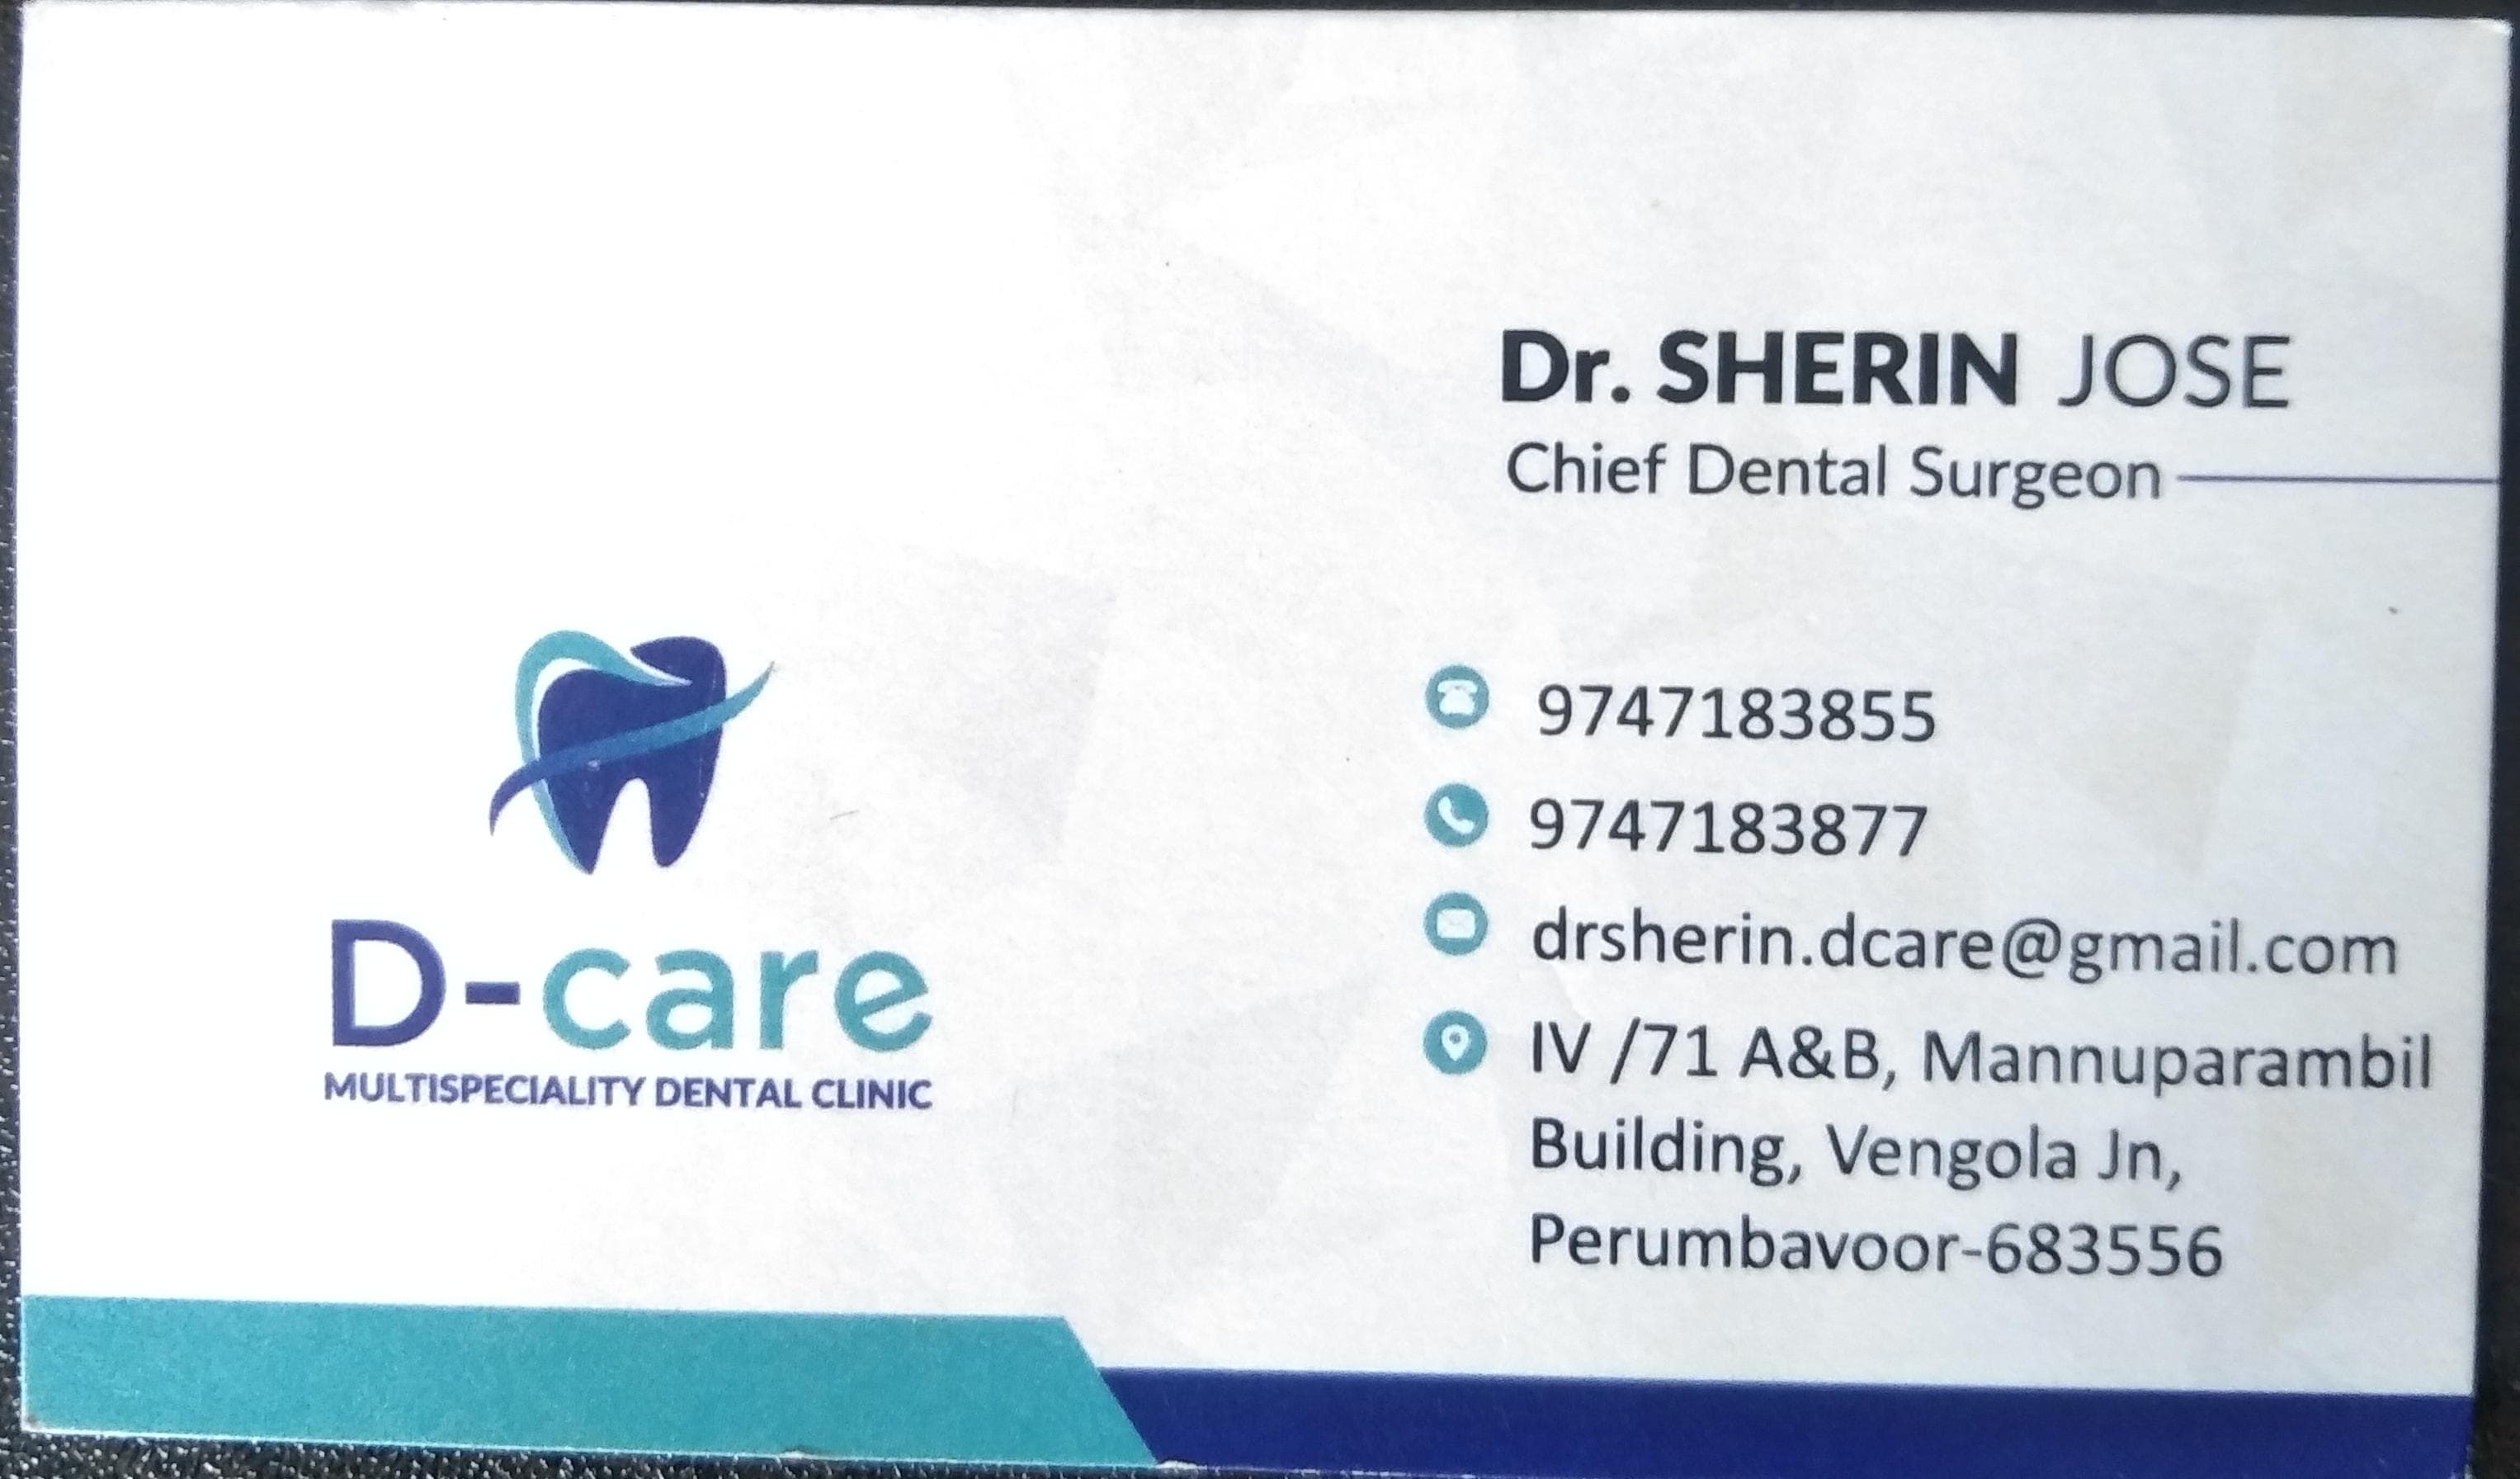 D- CARE multispeciality dental clinic, DENTAL CLINIC,  service in Perumbavoor, Ernakulam